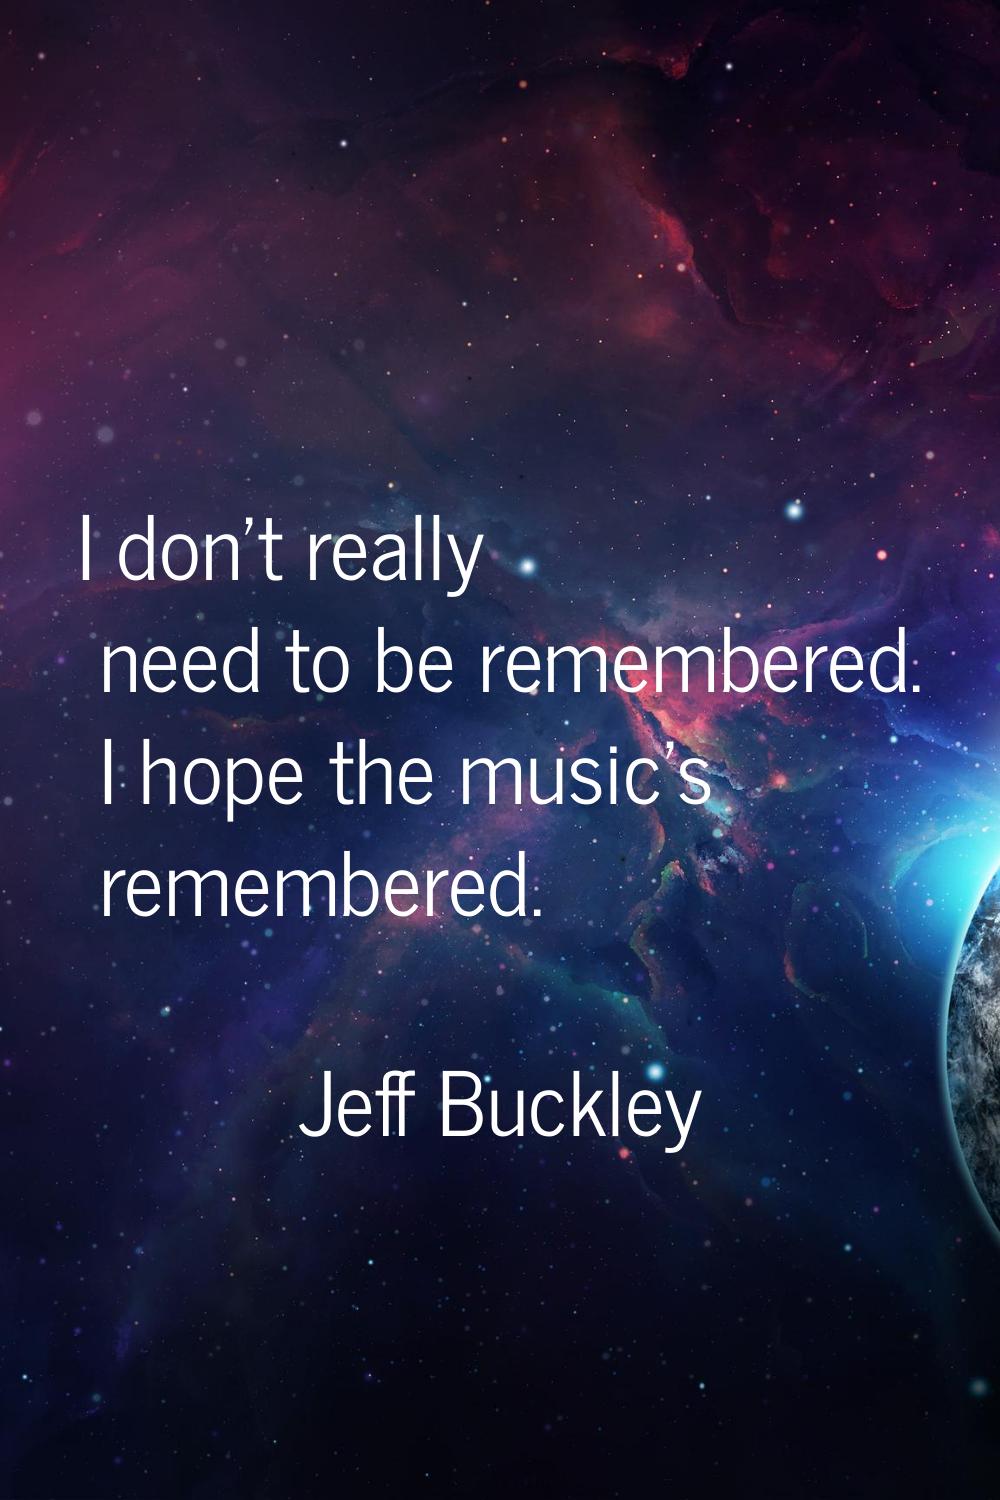 I don't really need to be remembered. I hope the music's remembered.